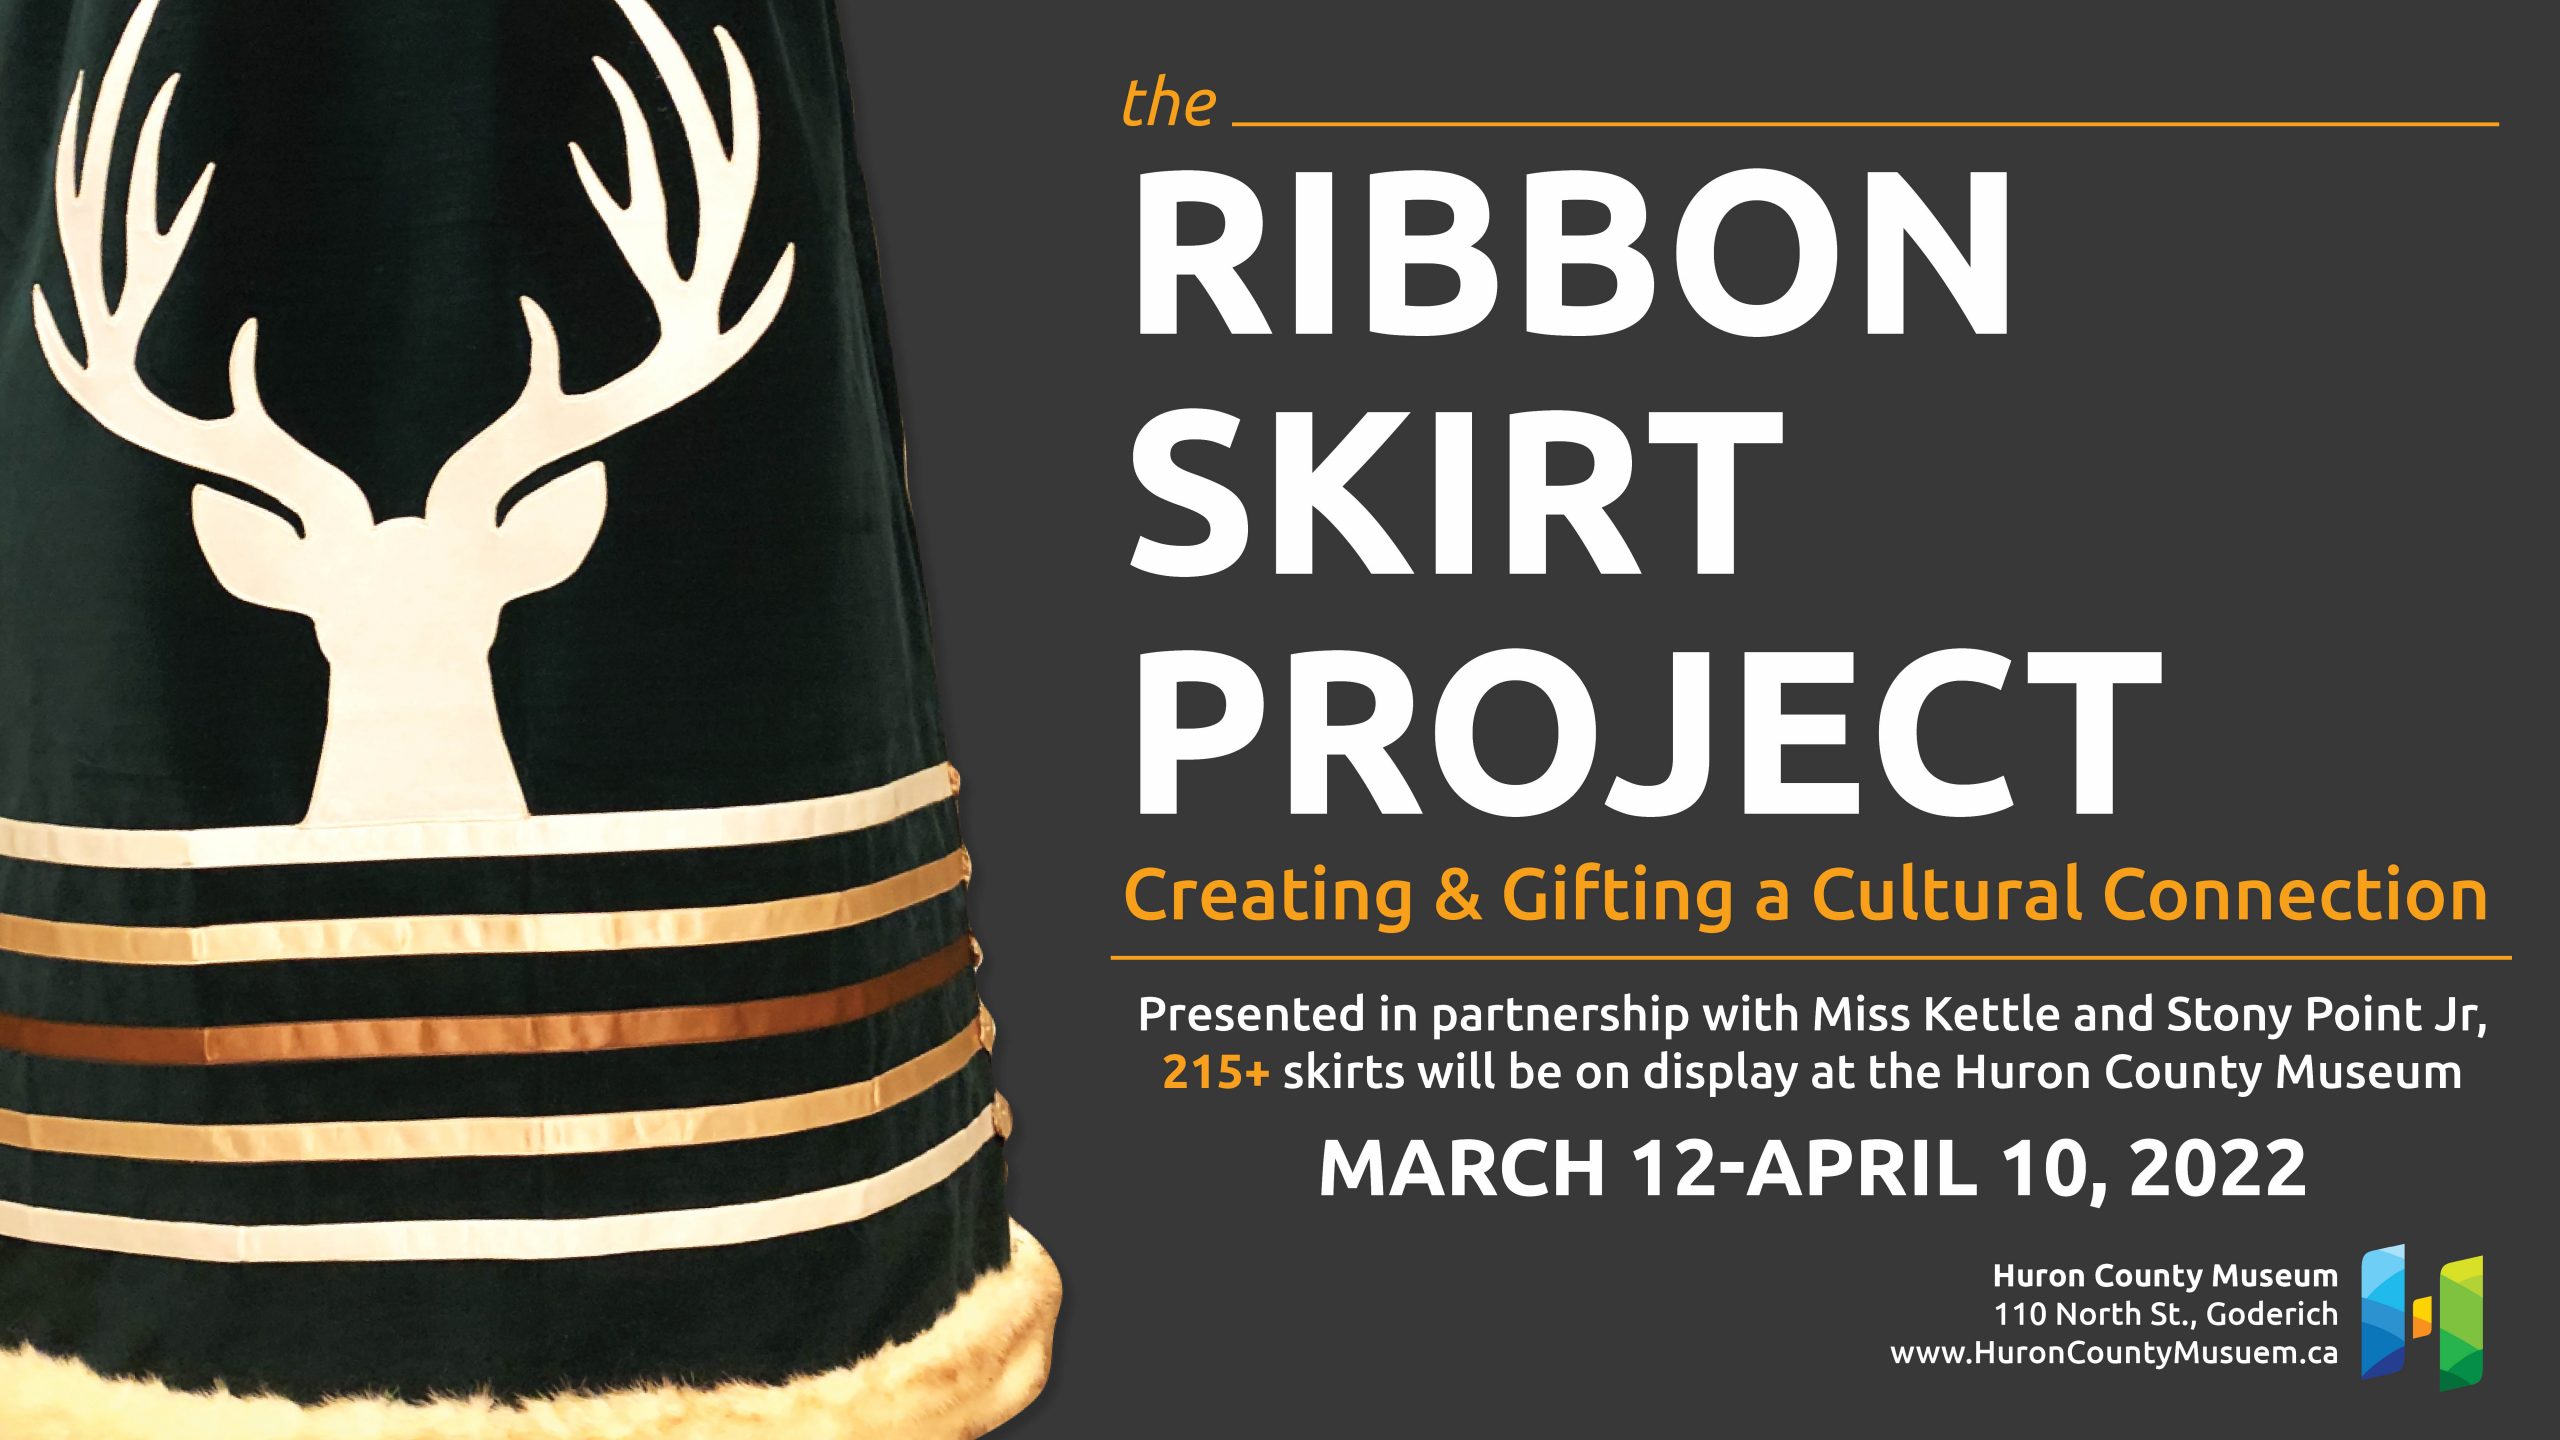 Image of Ribbon Skirt with text promoting project